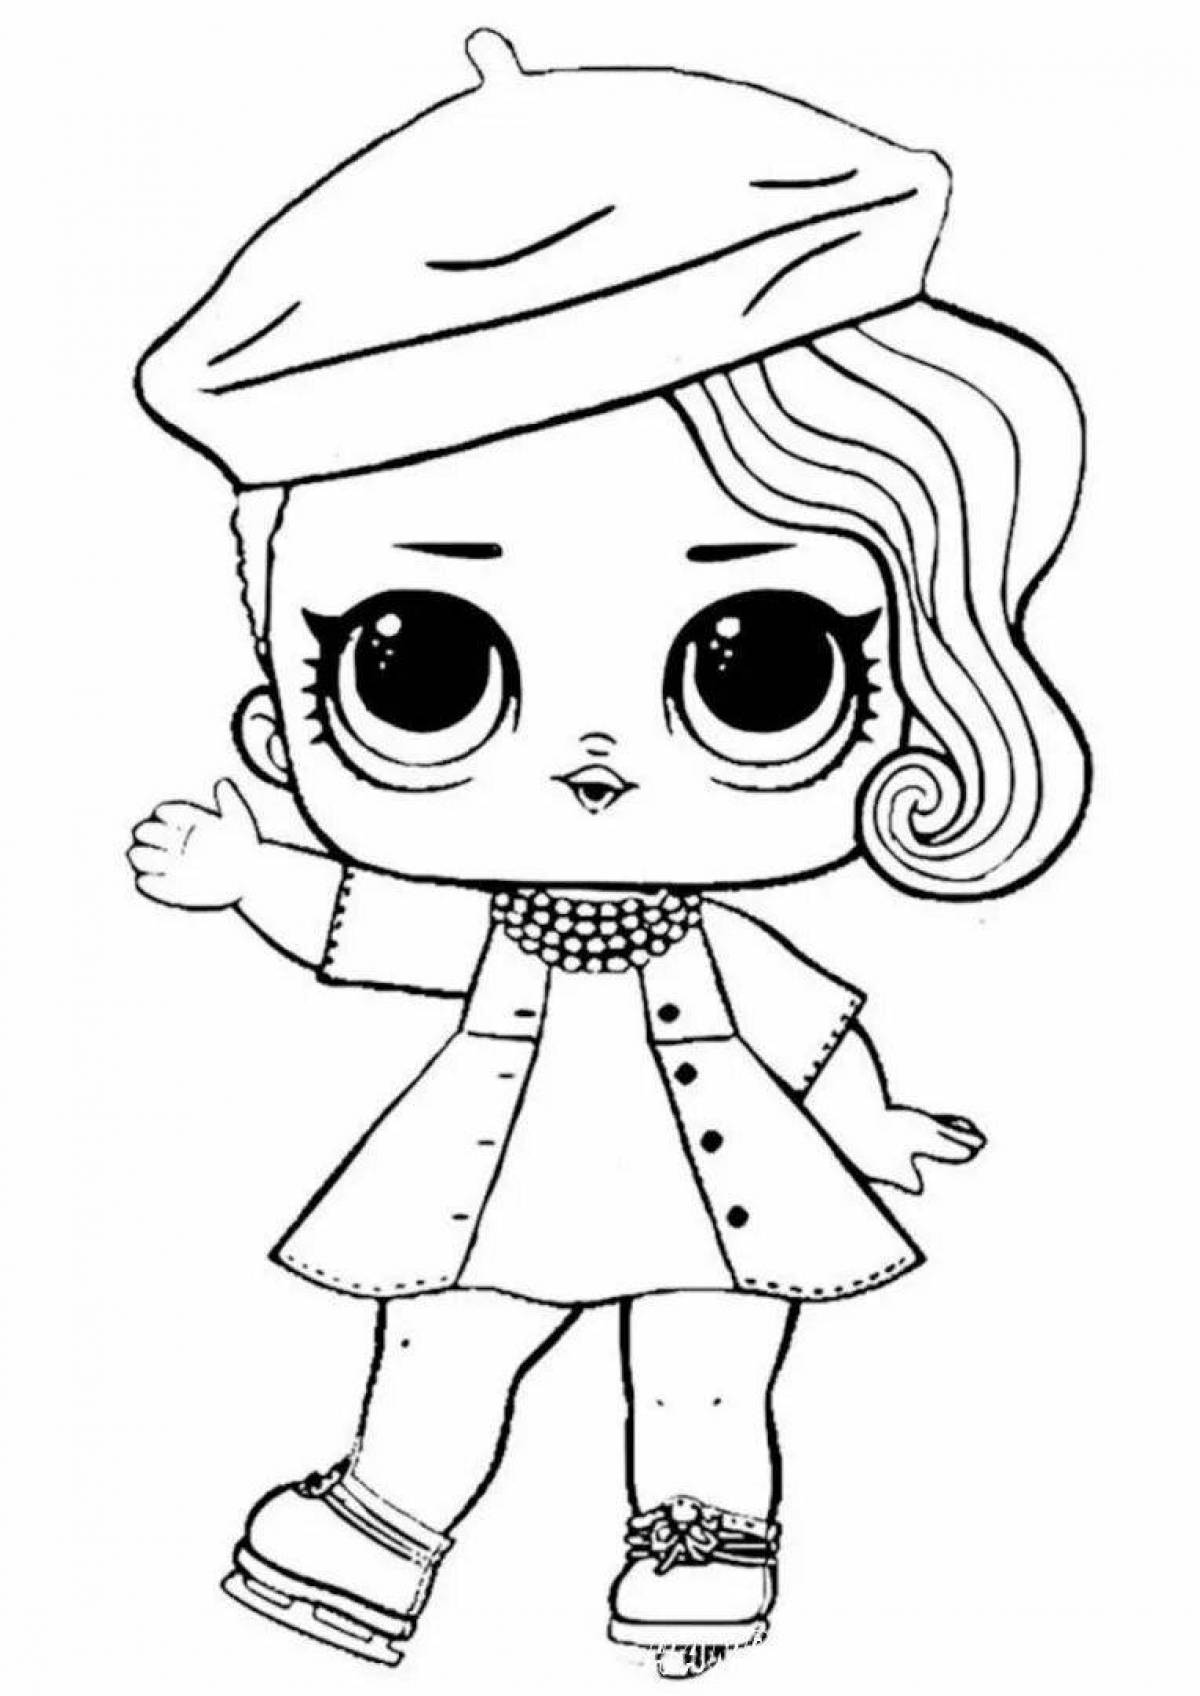 Low's playful doll coloring book for kids